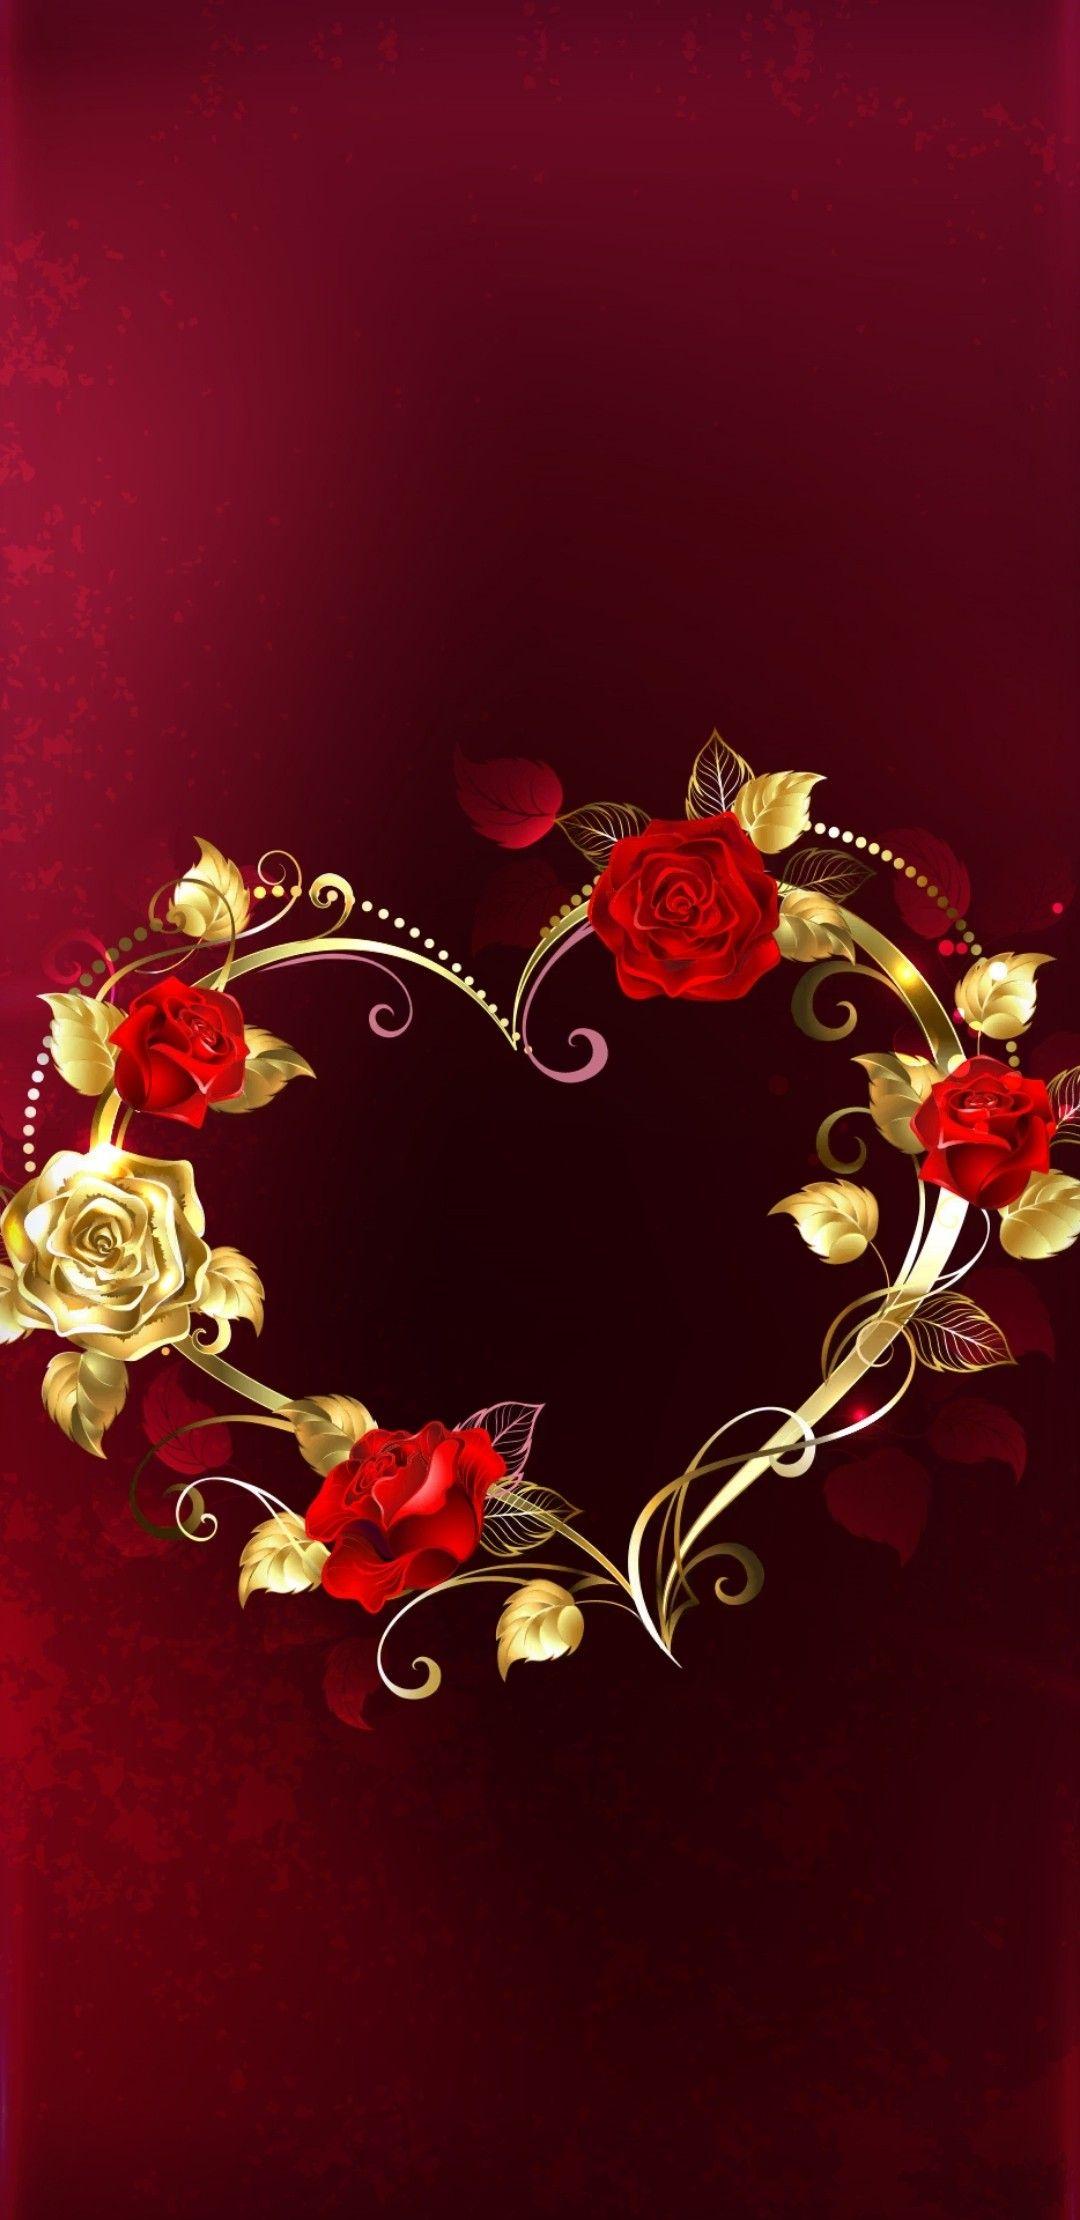 Heart Rose Wallpapers Top Free Heart Rose Backgrounds Wallpaperaccess